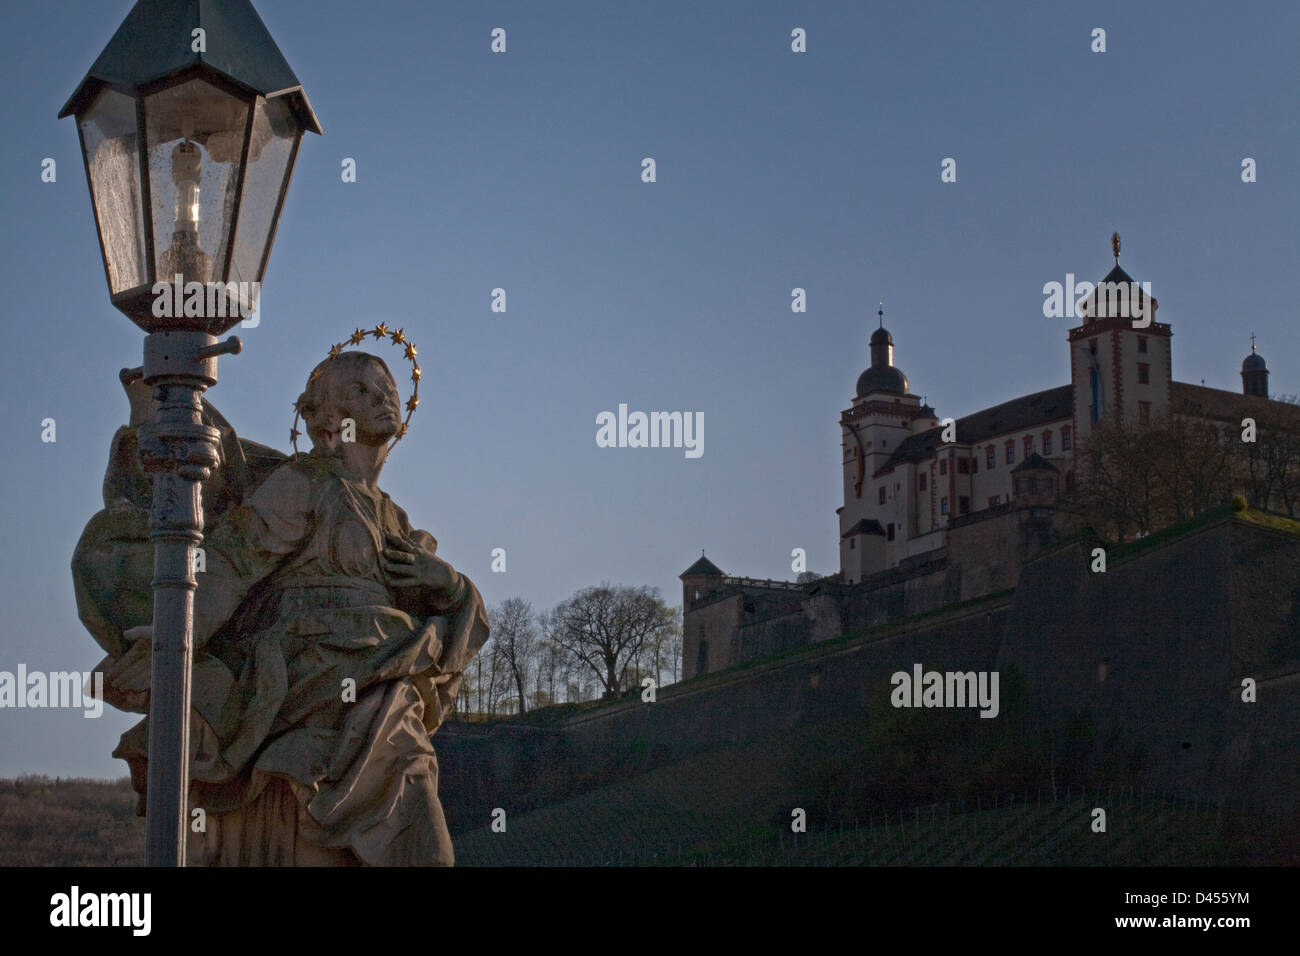 Statue on the Alte Mainbrucke, Wurzburg Germany and the Marienberg (Mary's hill) on the background. Stock Photo